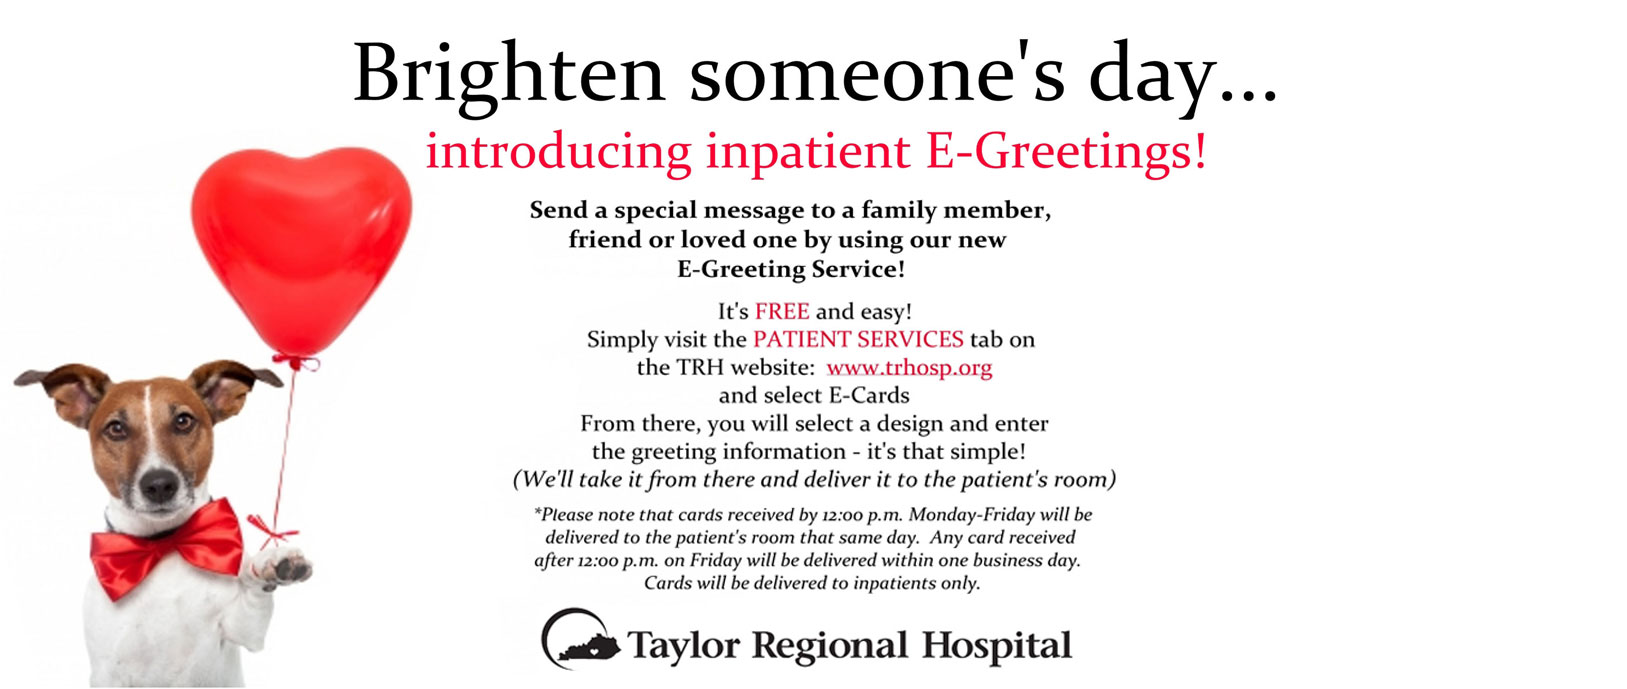 Brighten Someone's Day...
Introducing Inpatient E-Greetings!
Send a special message to a family member, friend, or loved one by using our new E-Greeting Service!
It's FREE and easy! Simply visit the PATIENT SERVICES tab on the TRH website: www.trhodp.oth snd select E-Cards. From there, you will select a design and enter the greeting information- it's that simple! (We'll take it. from there and deliver it to the patients room)

*Please note that cards received by 12:00 p.m. Monday-Friday will be delivered to the patient's room the same day. Any card received after 12:00 p.m. on Friday will be delivered within one business day. Cards will be delivered to inpatients only.